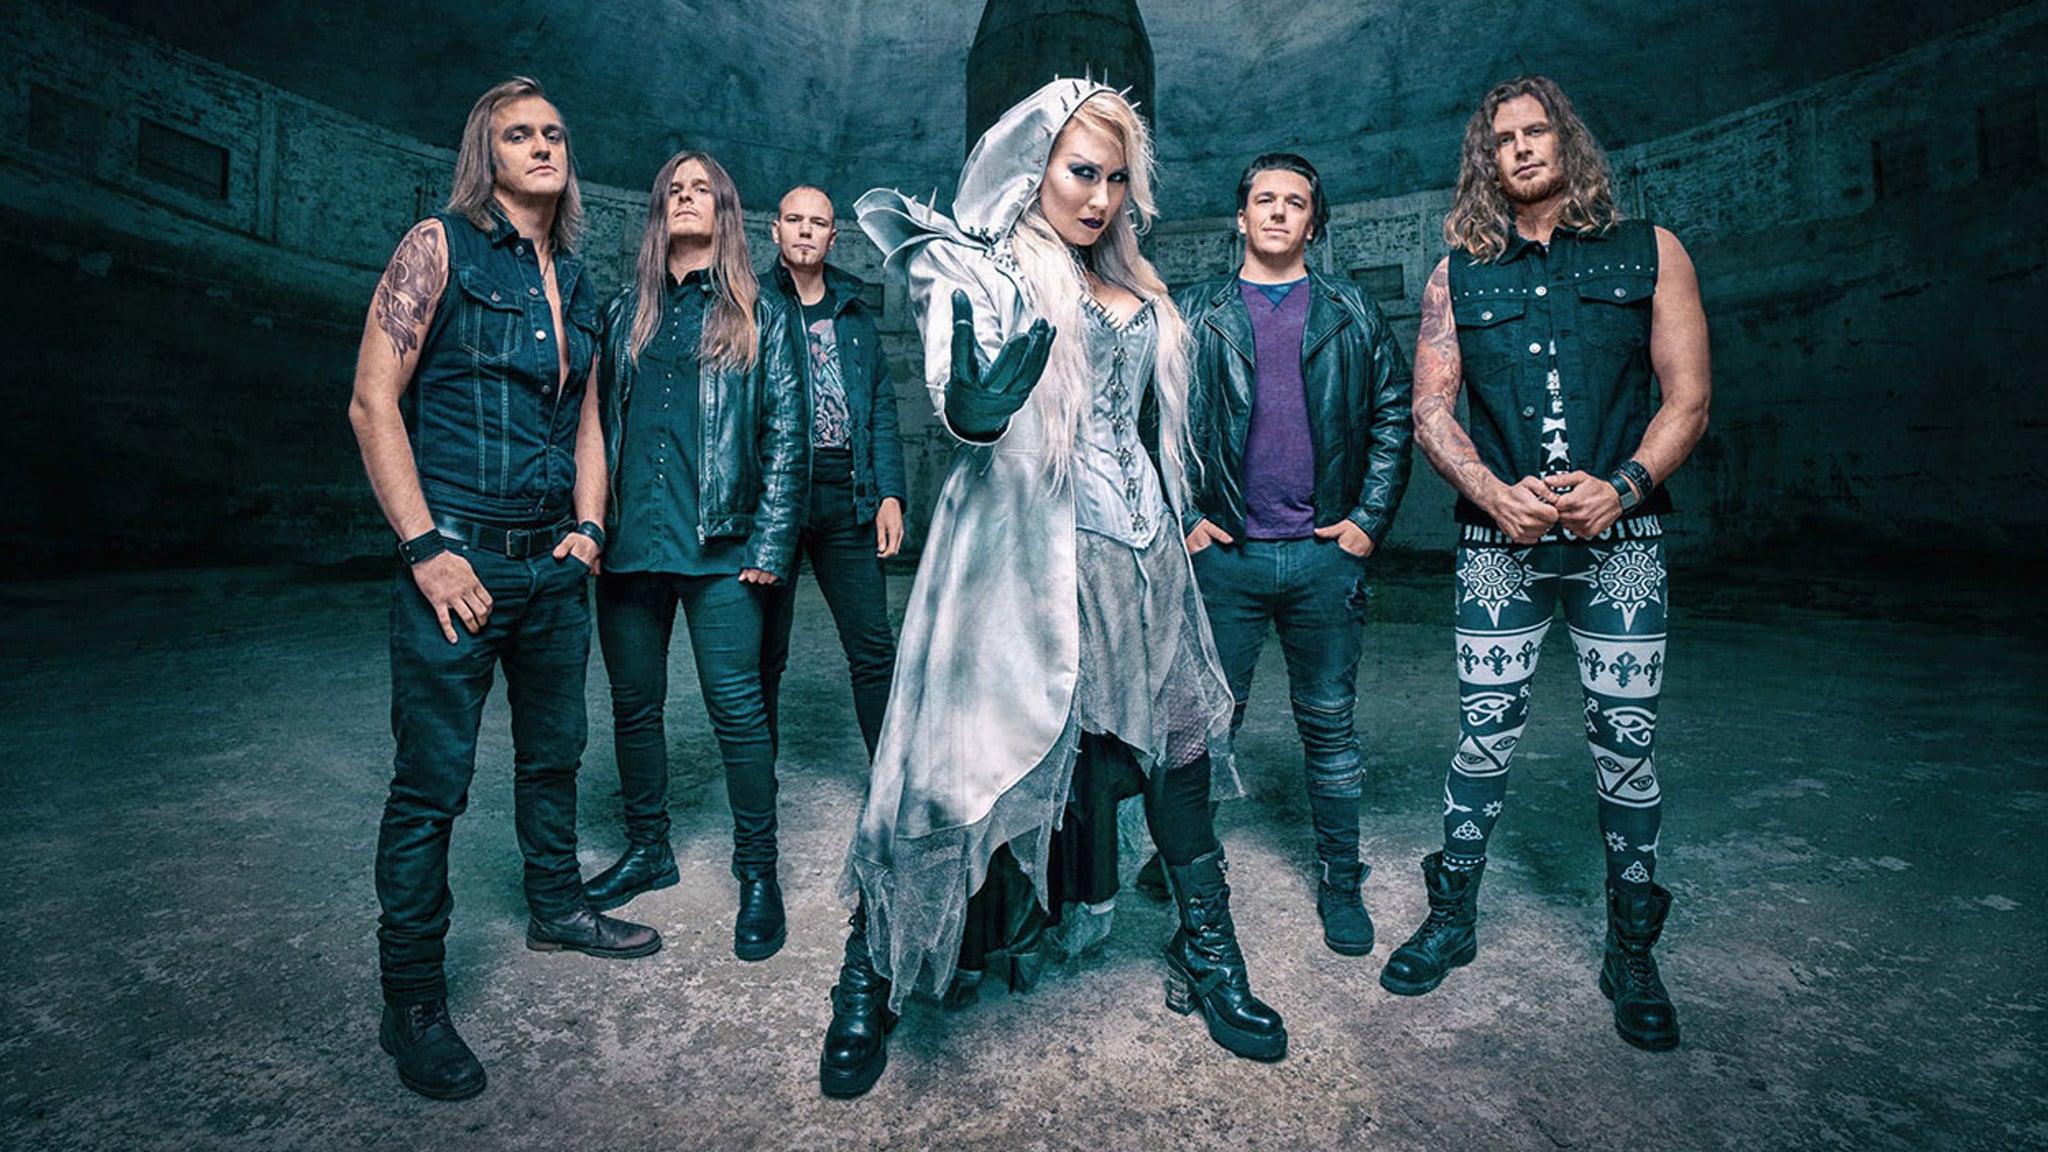 Battle Beast Circus Of Doom Over North America pre-sale passcode for show tickets in Cleveland, OH (House of Blues Cleveland)